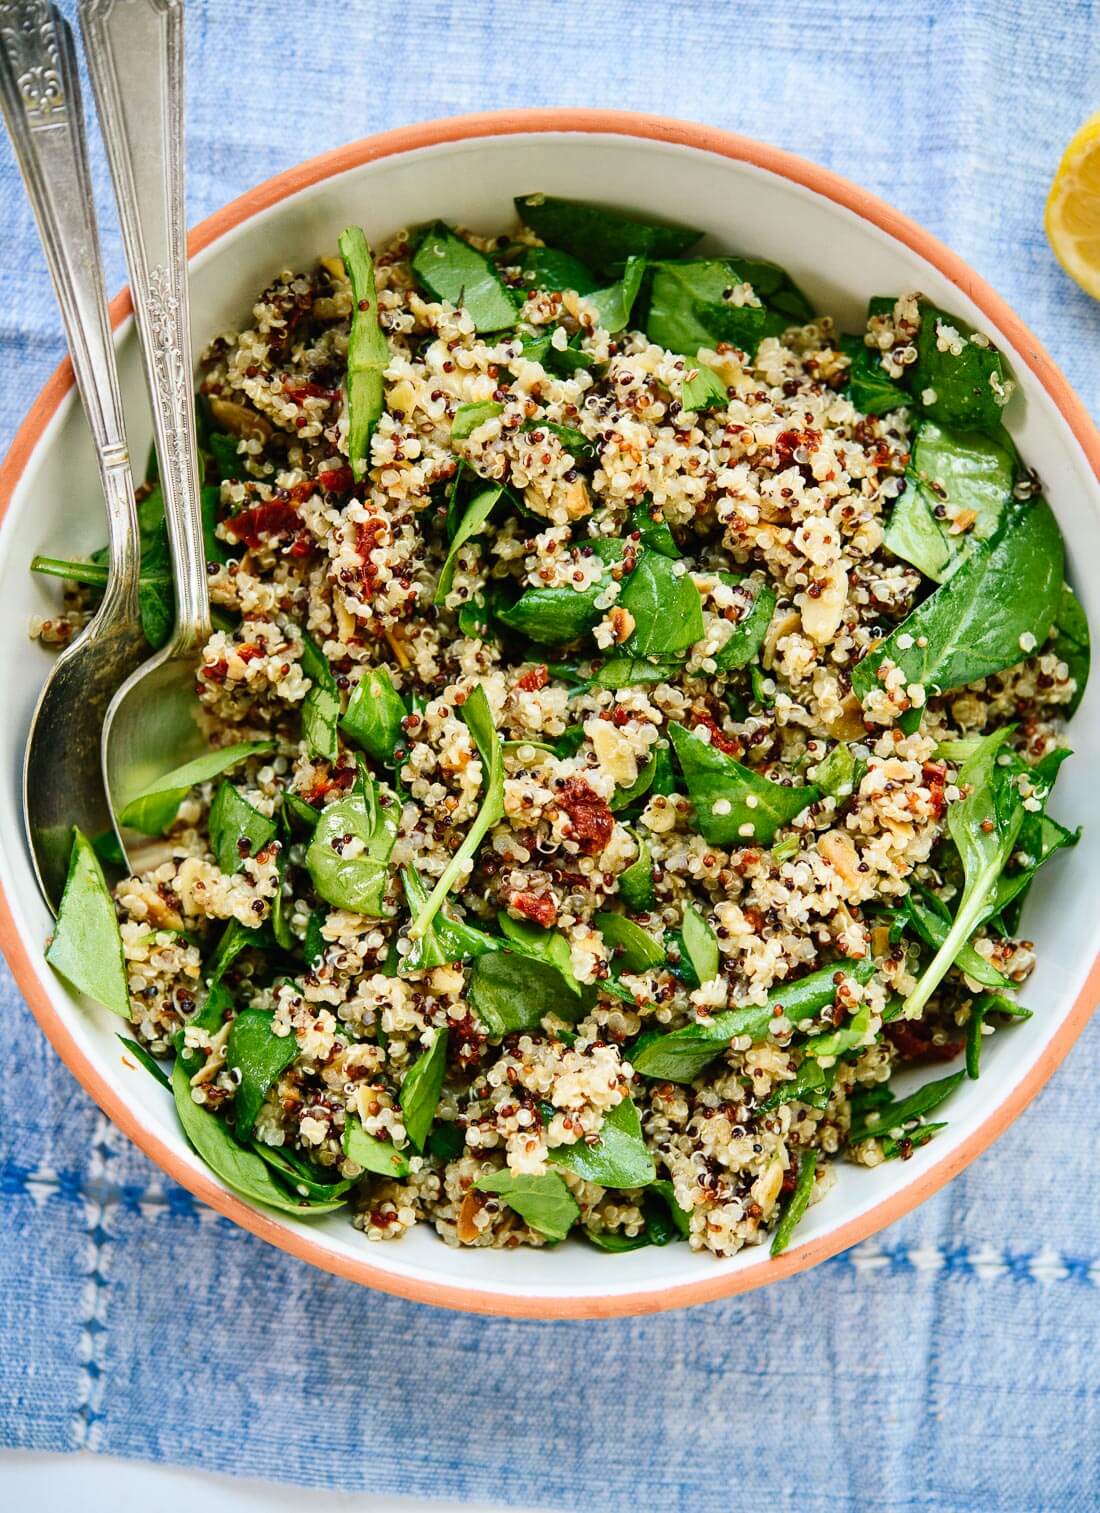 This simple quinoa salad is perfect for packed lunches! cookieandkate.com